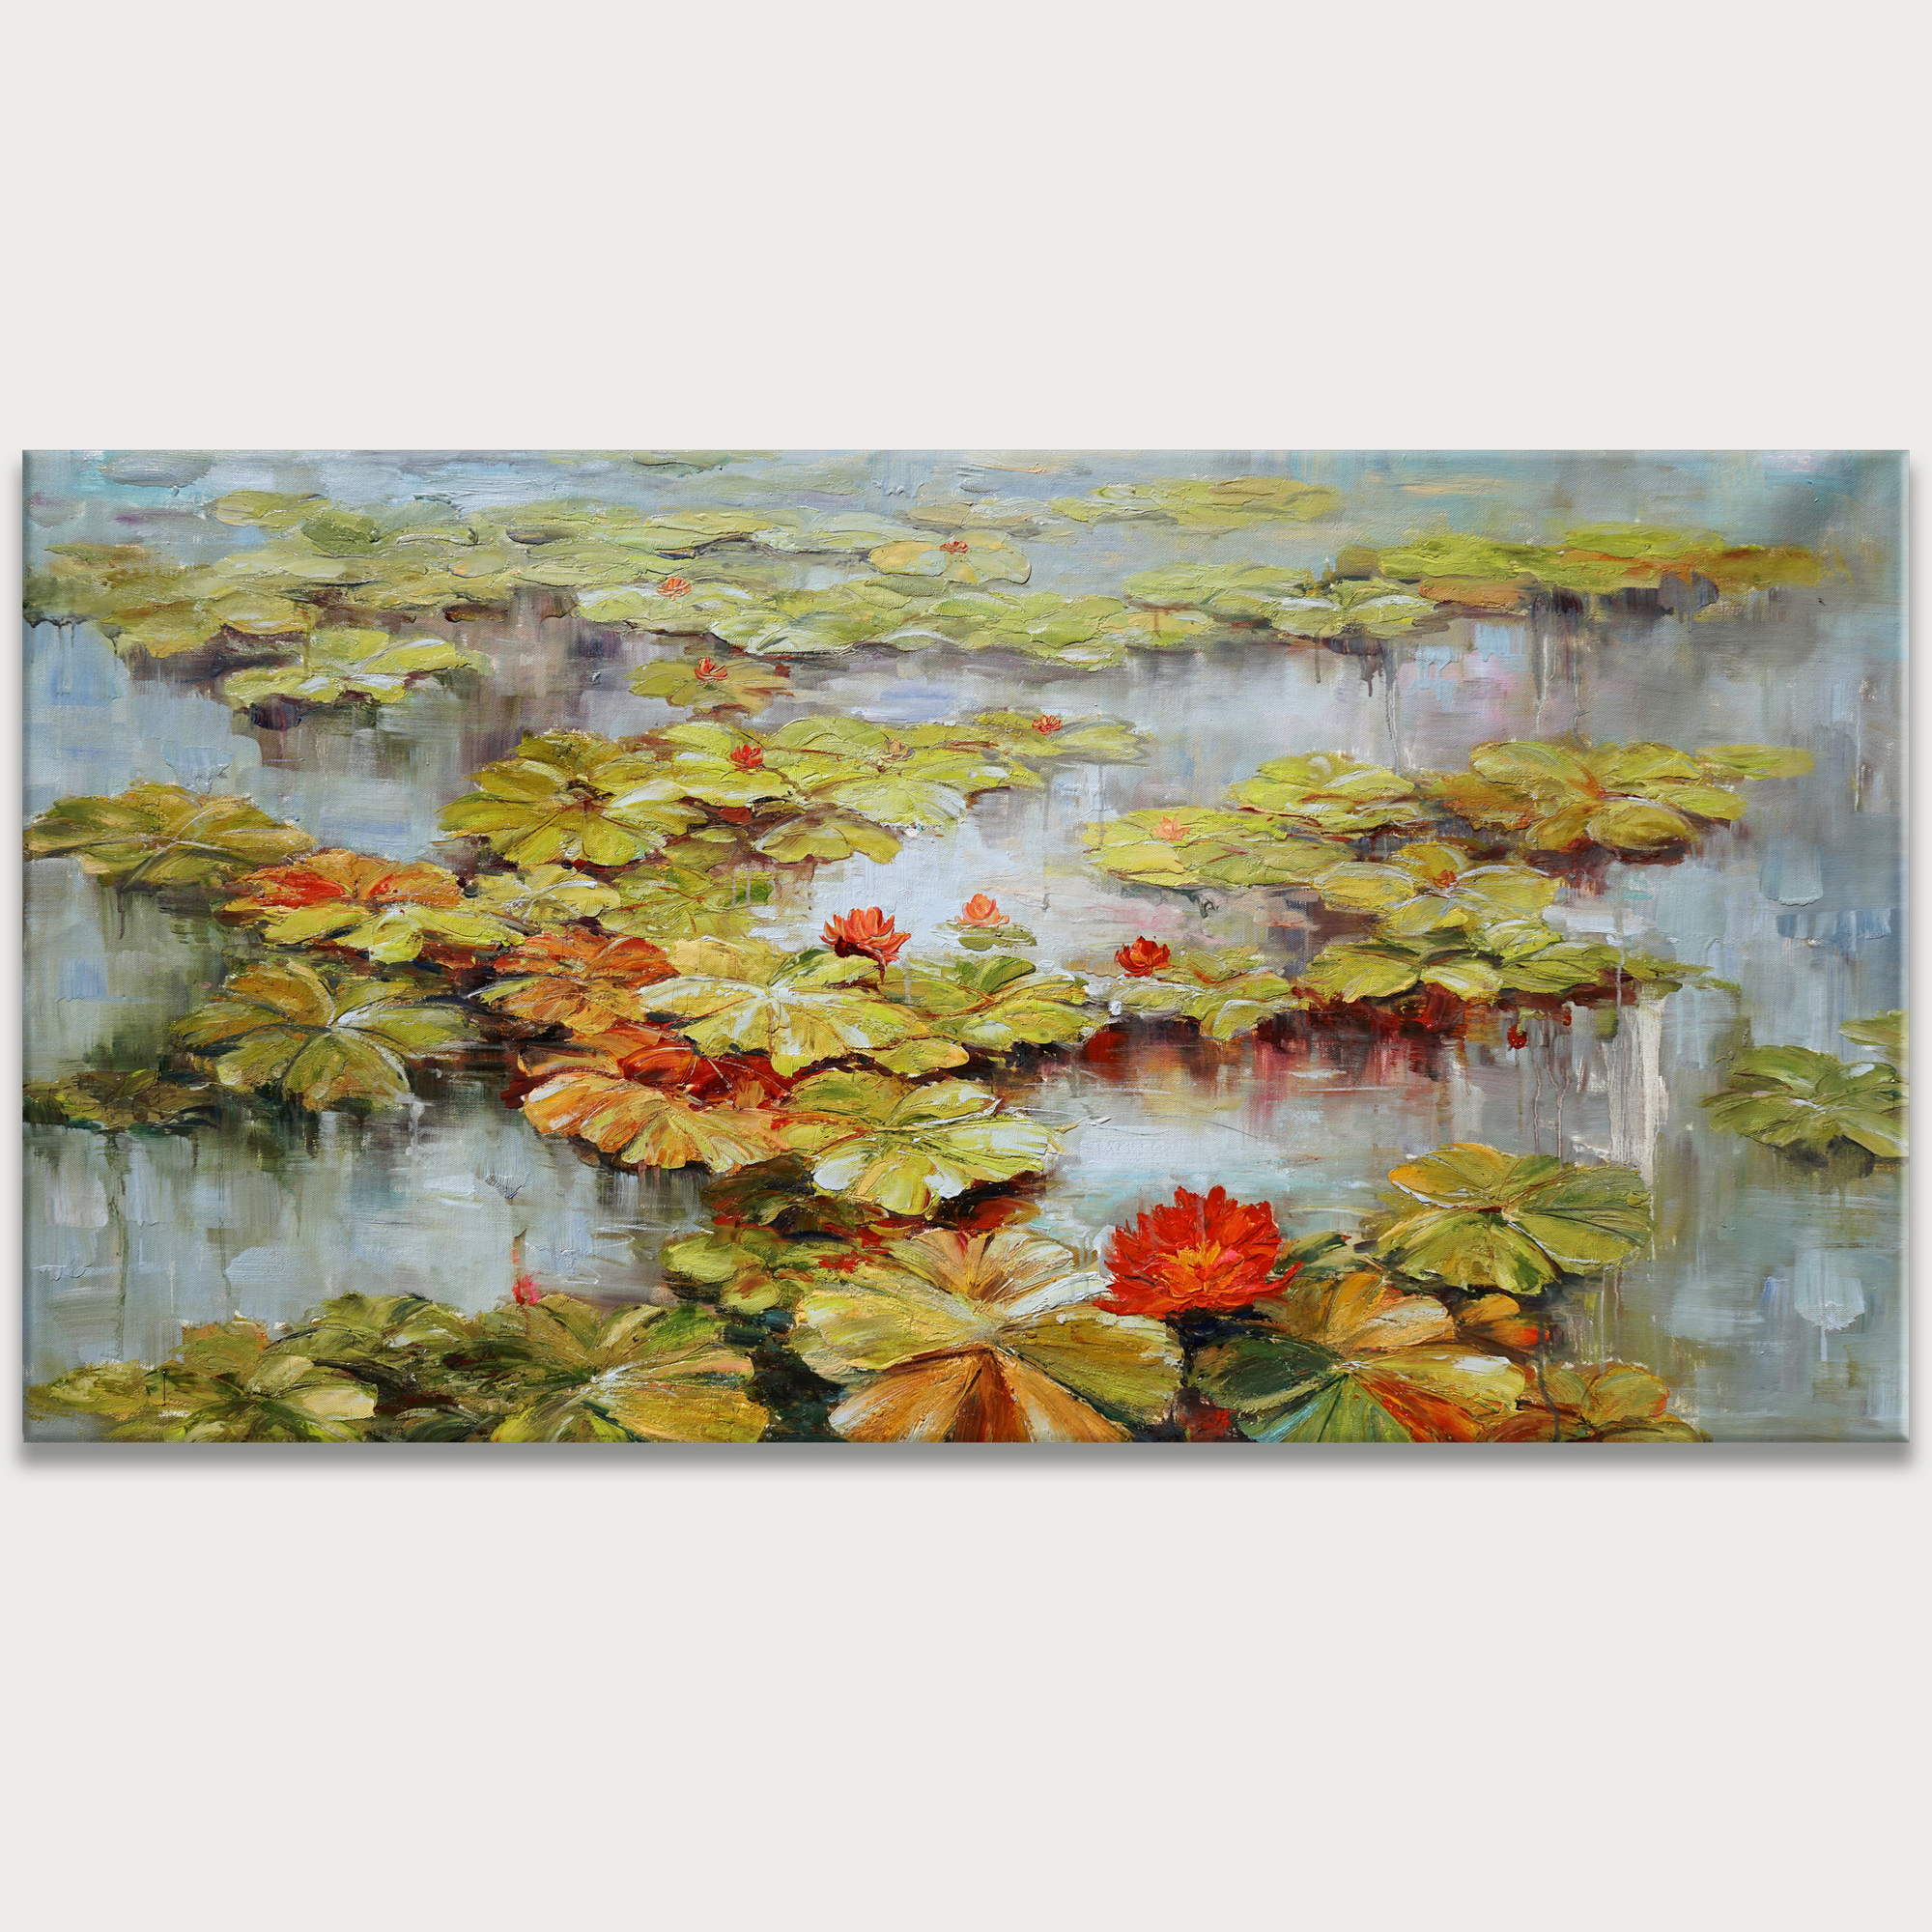 Hand painted Water Lilies on a Mirror of Water 90x180cm